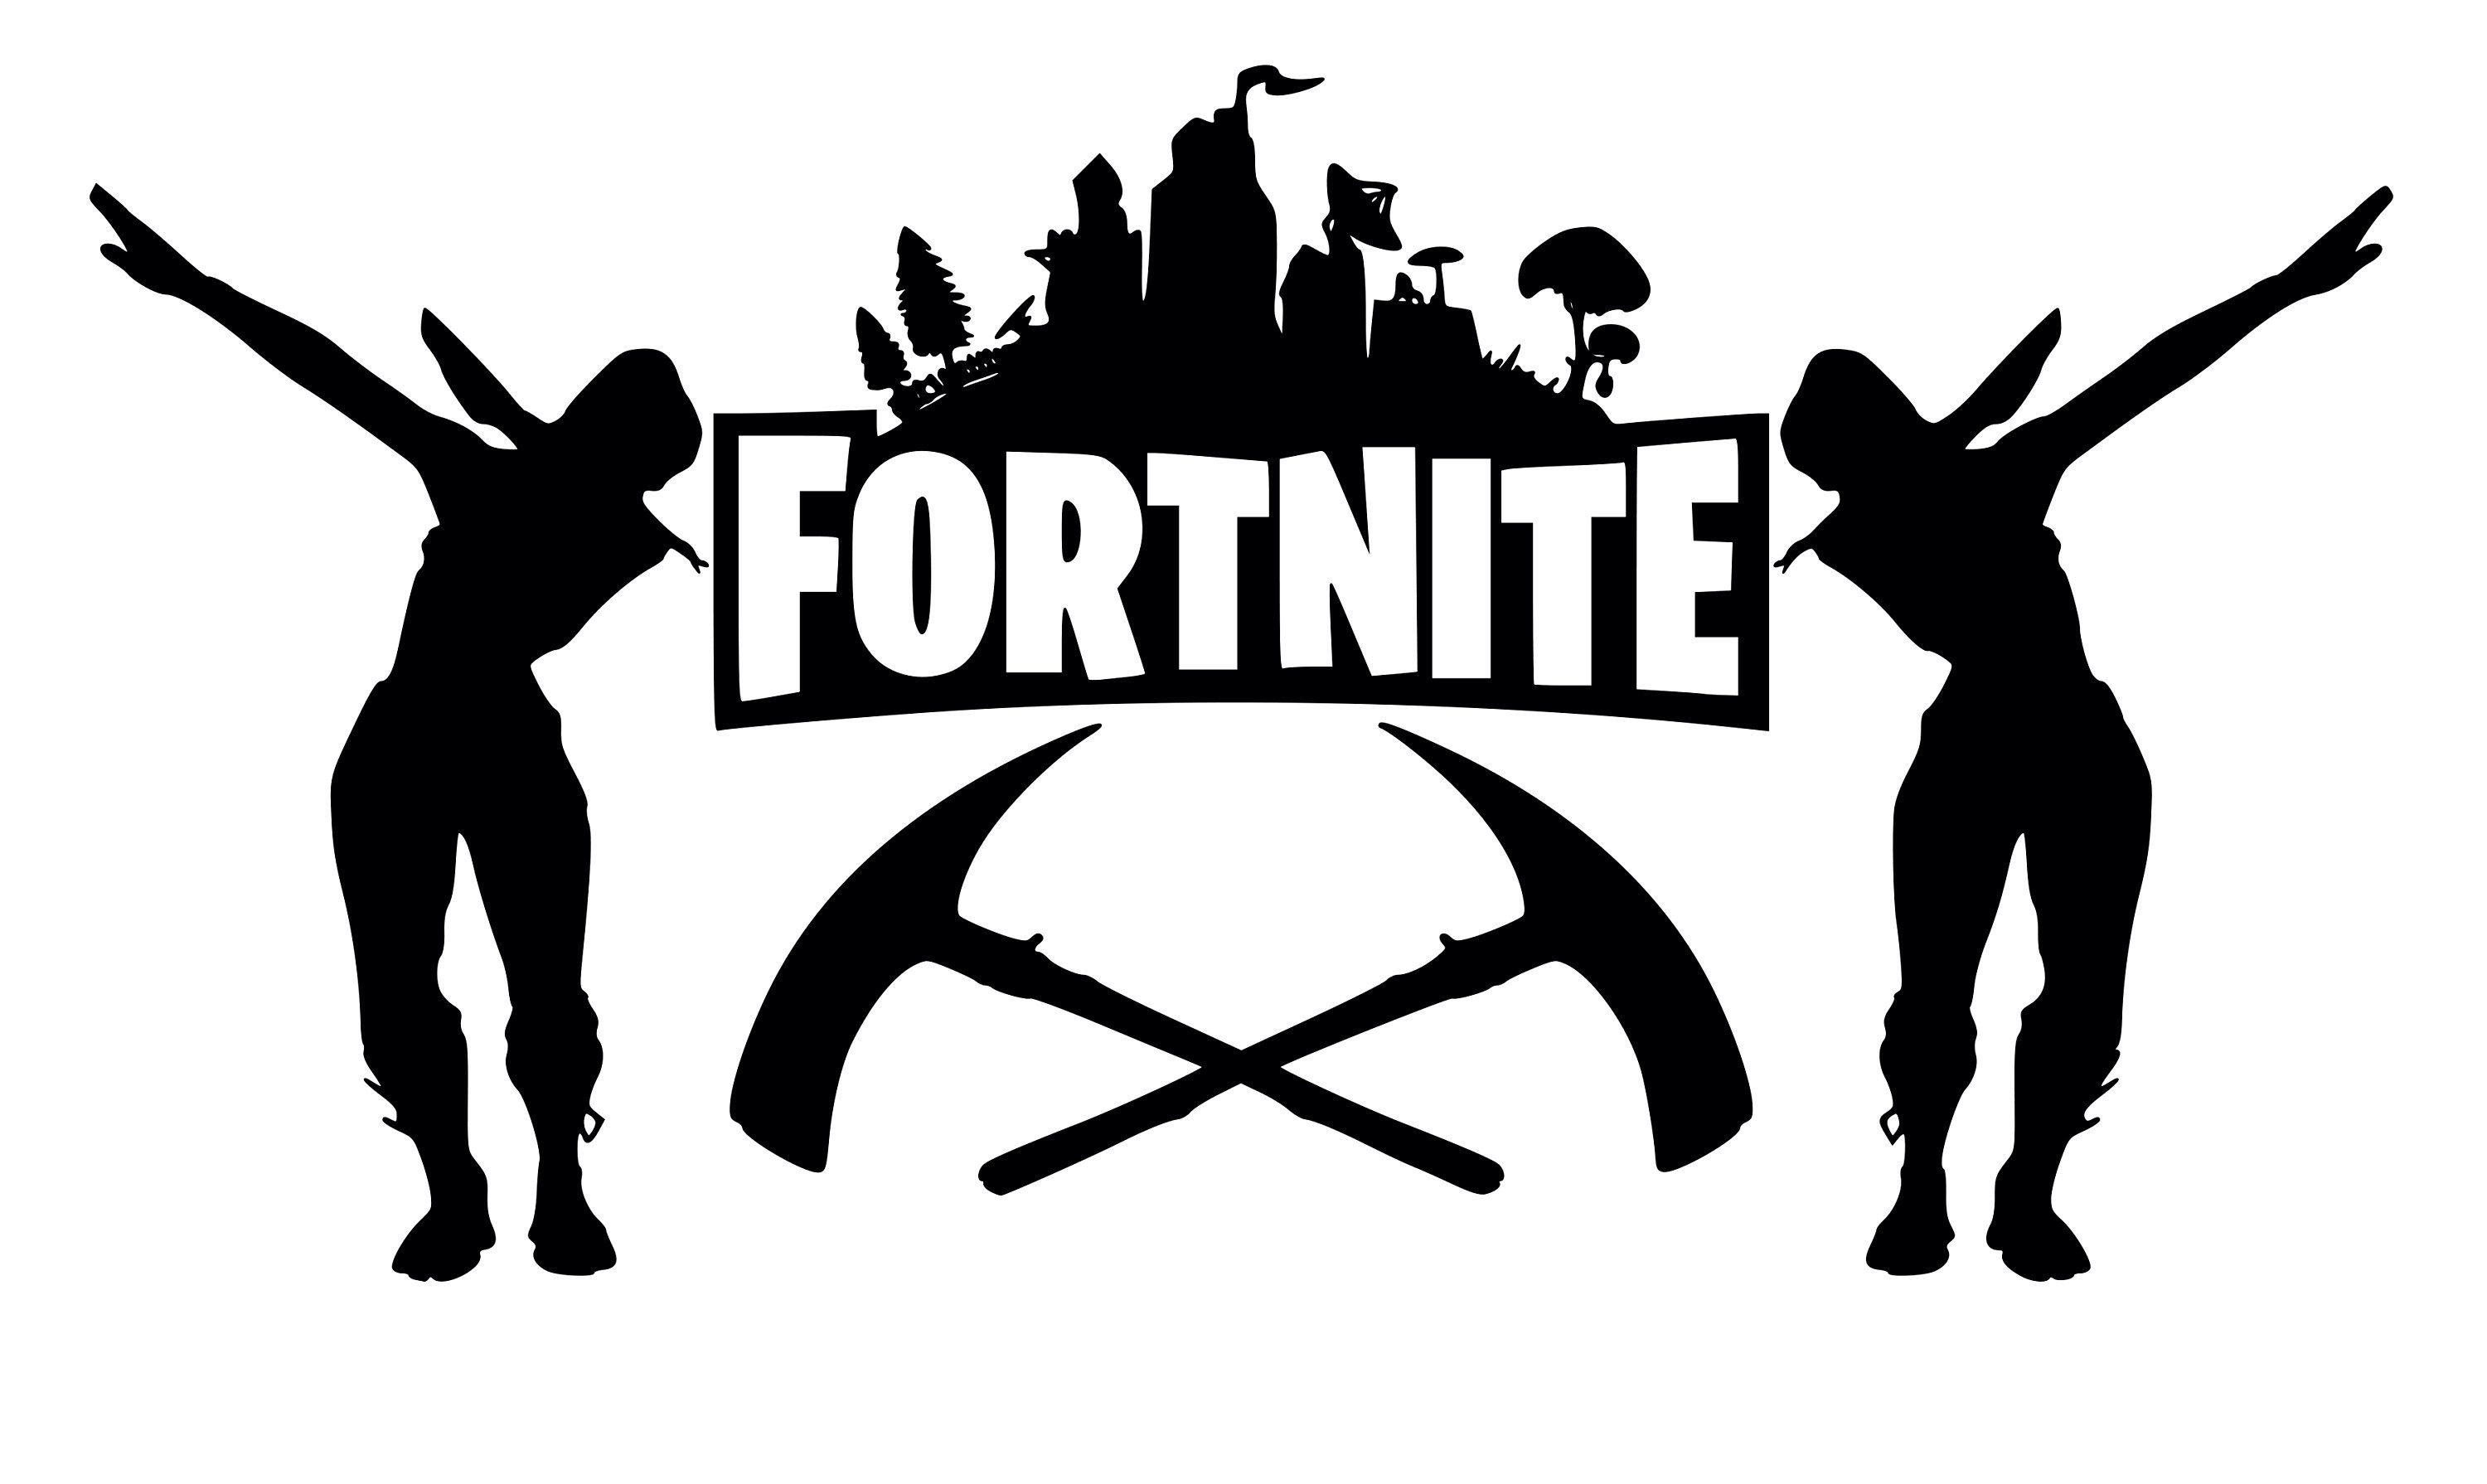 Fortnite Clipart Png Silhouette and other clipart images on Cliparts pub ™.